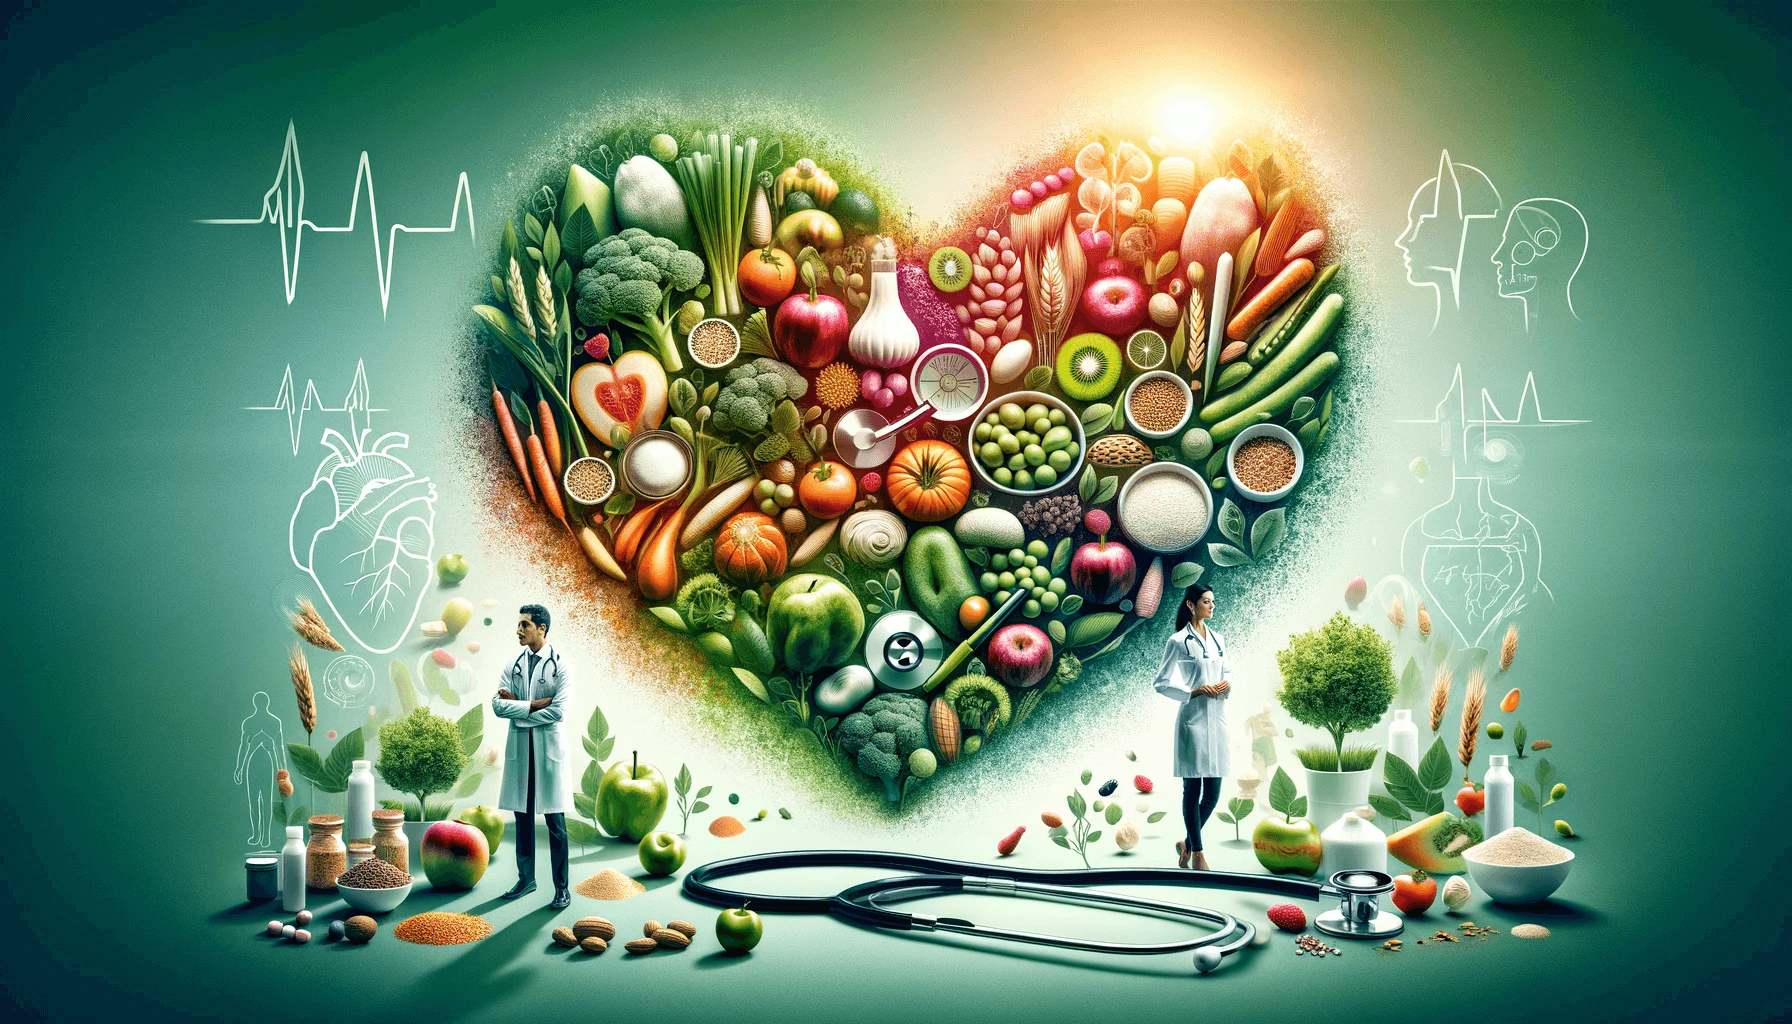 Nutrition and health concept showing diverse healthcare professionals and a variety of fresh, healthy foods arranged around a stethoscope.